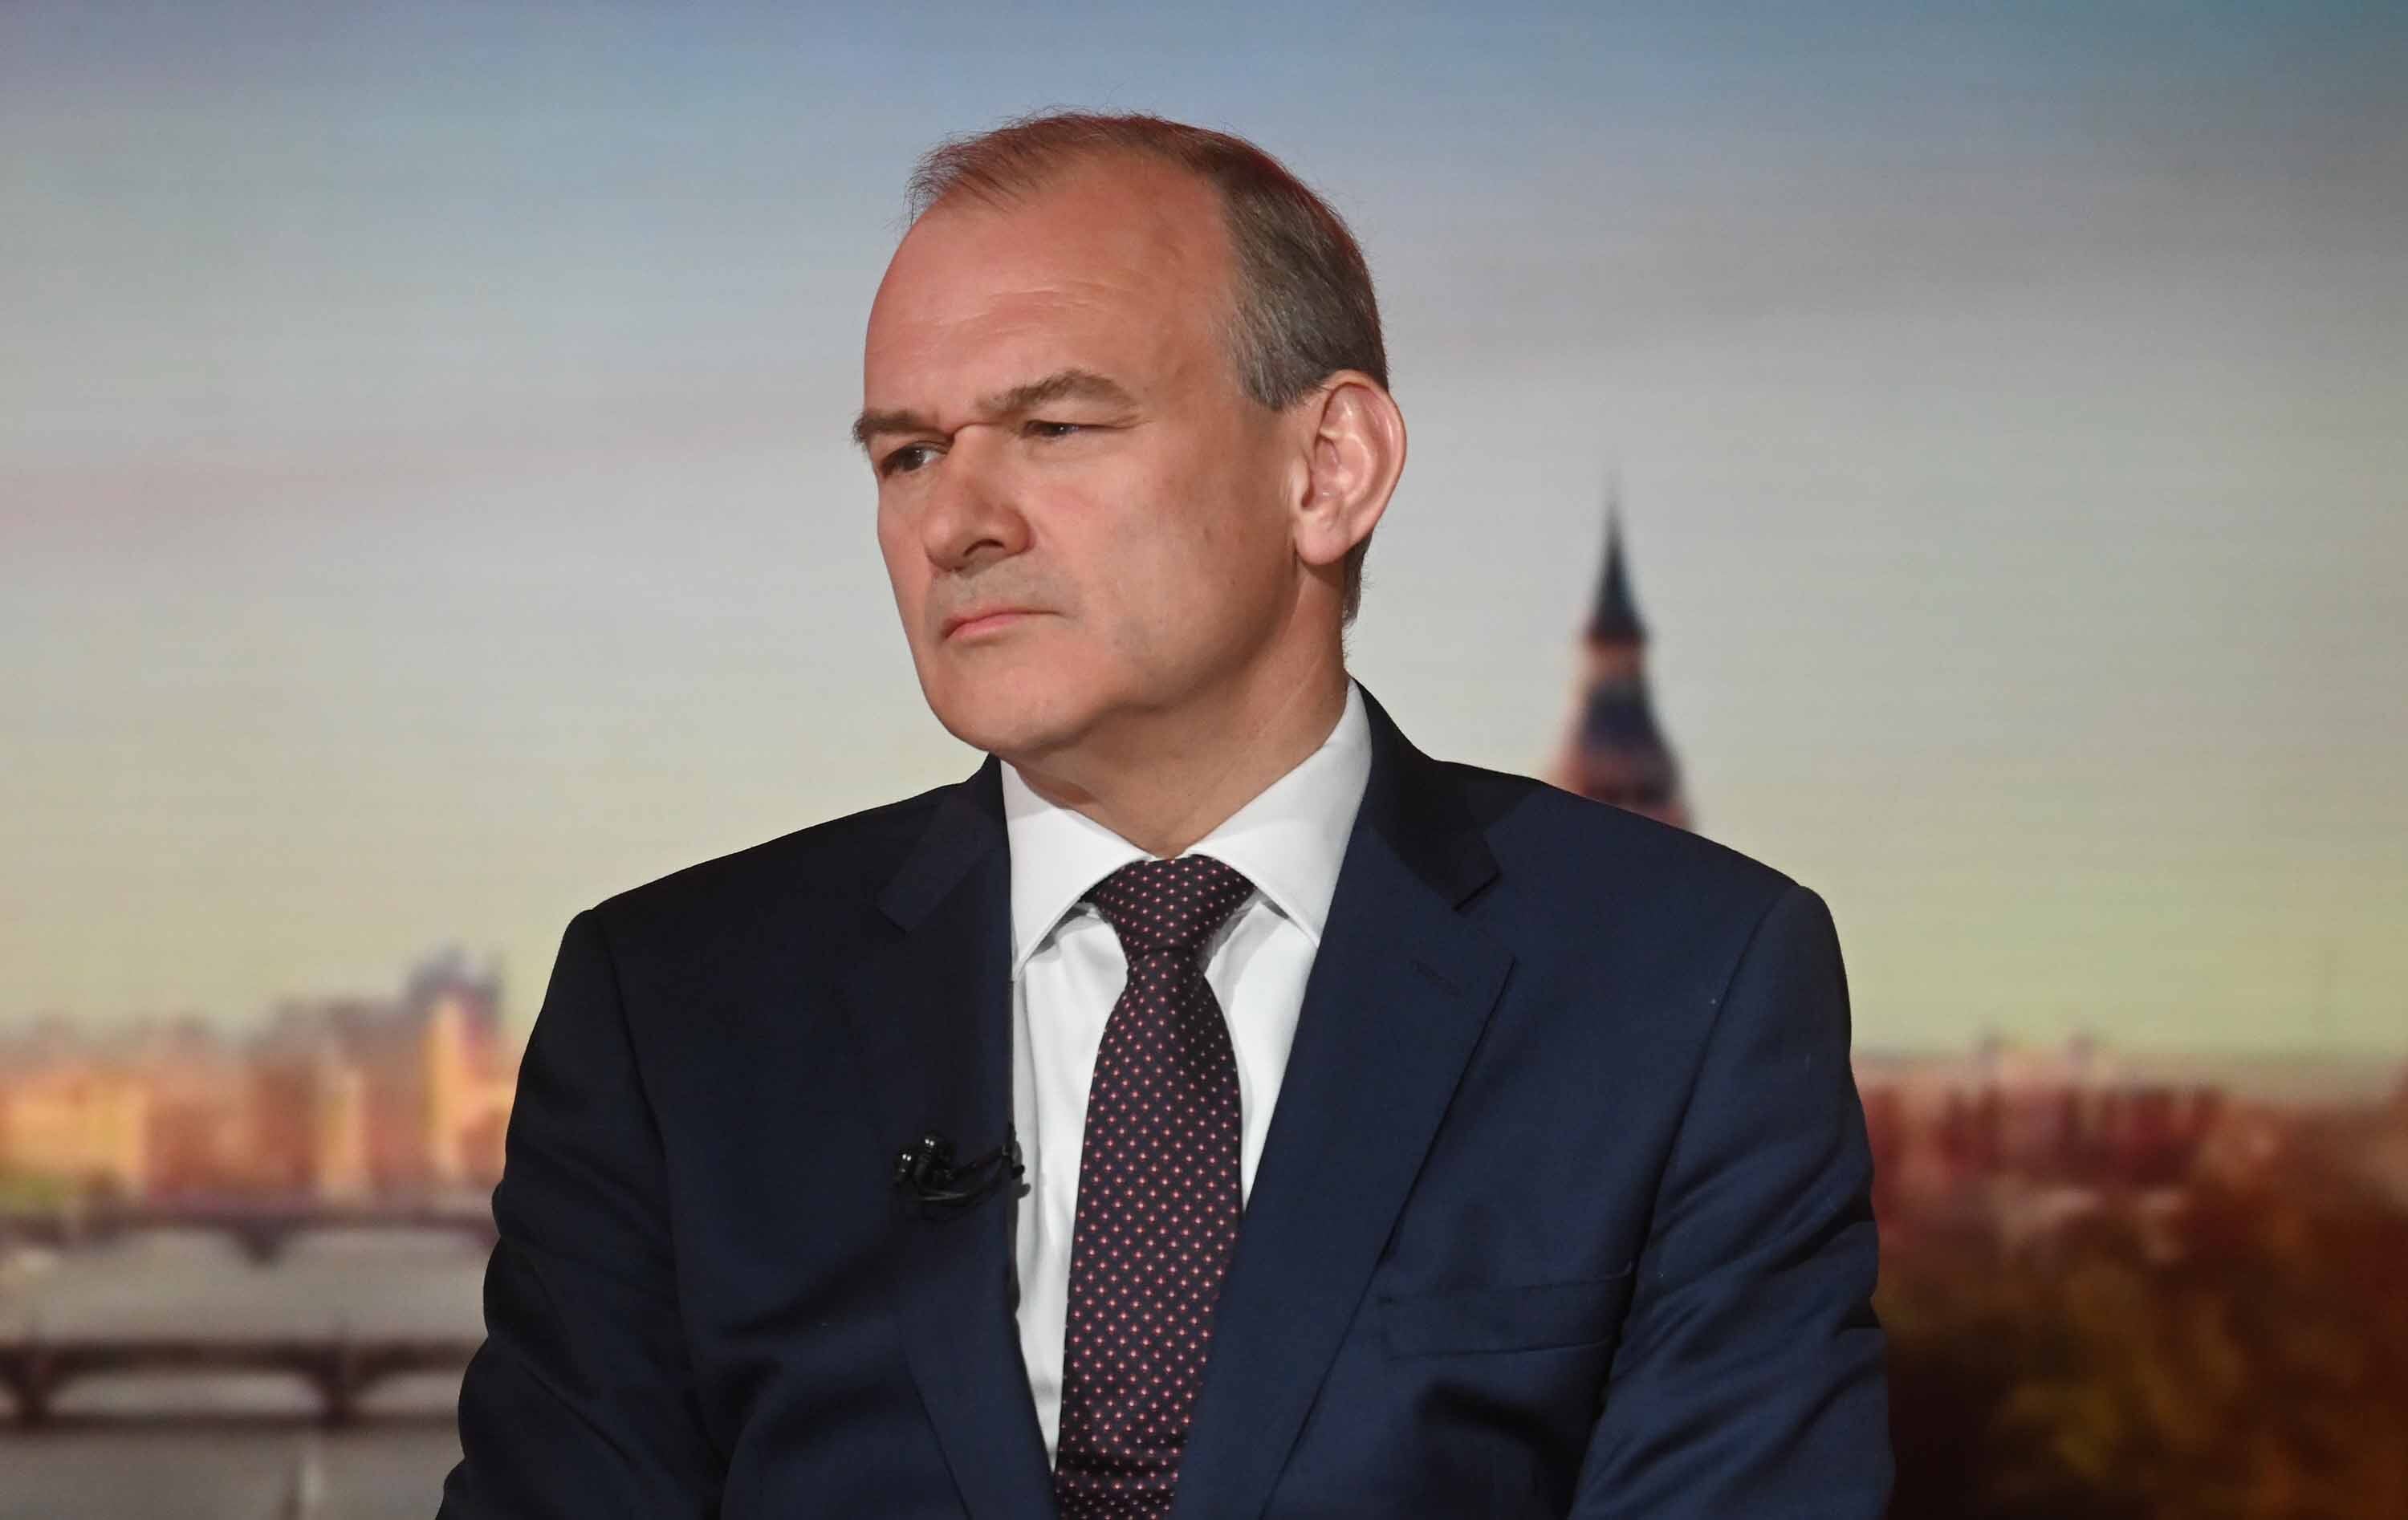 Lib Dem leader Sir Ed Davey has called the lack of face-to-face GP appointments ’devastating’